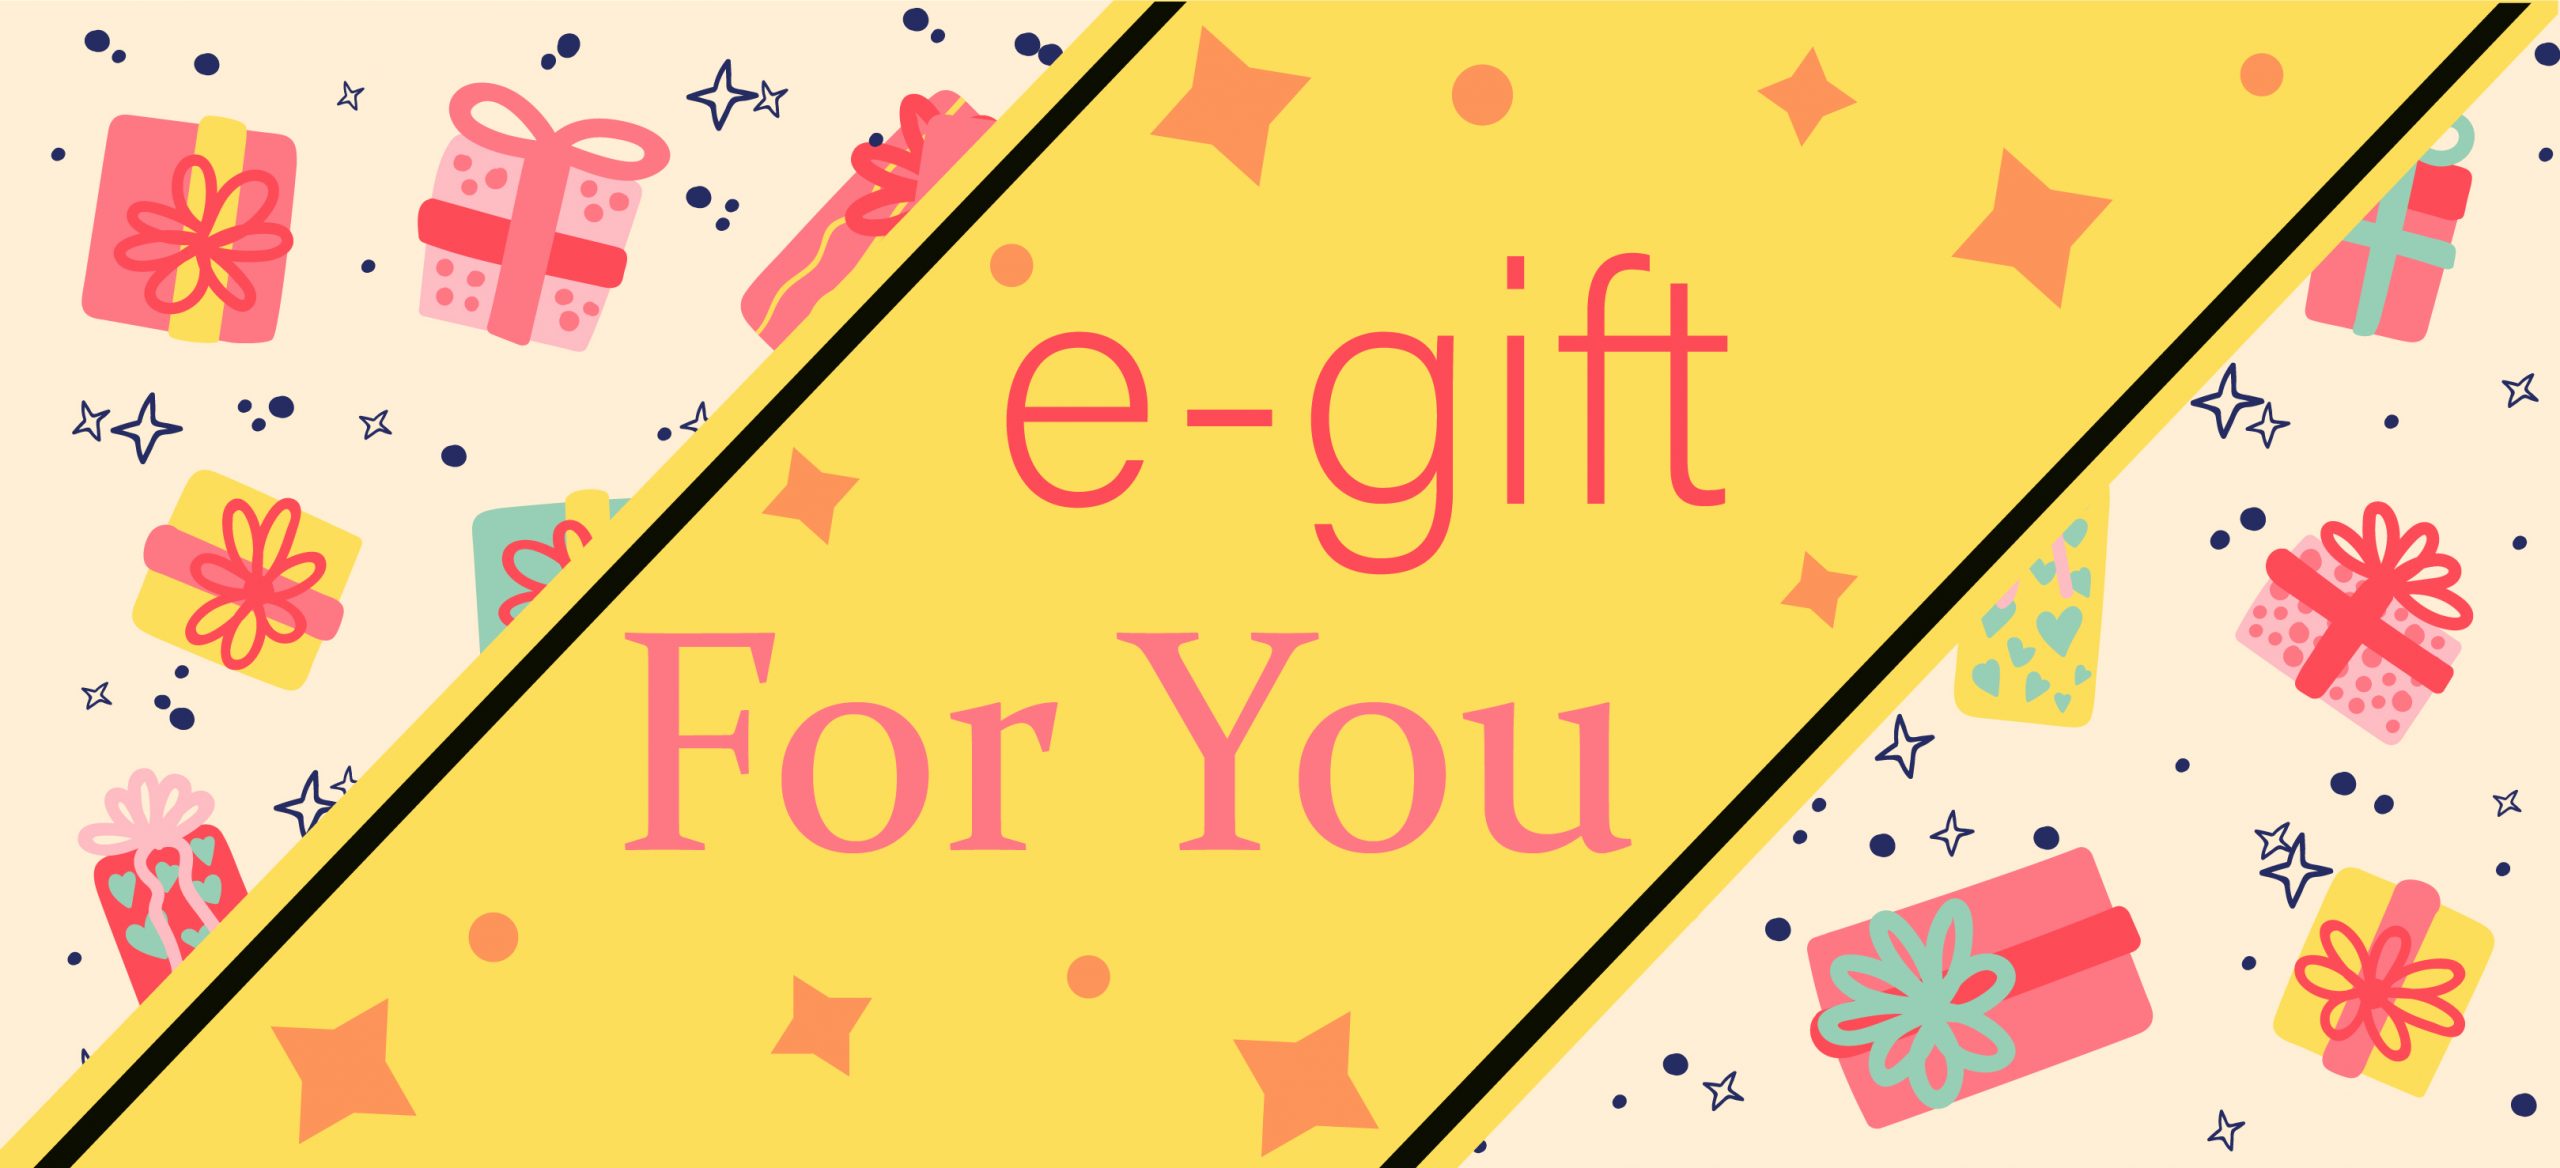 e gift for you